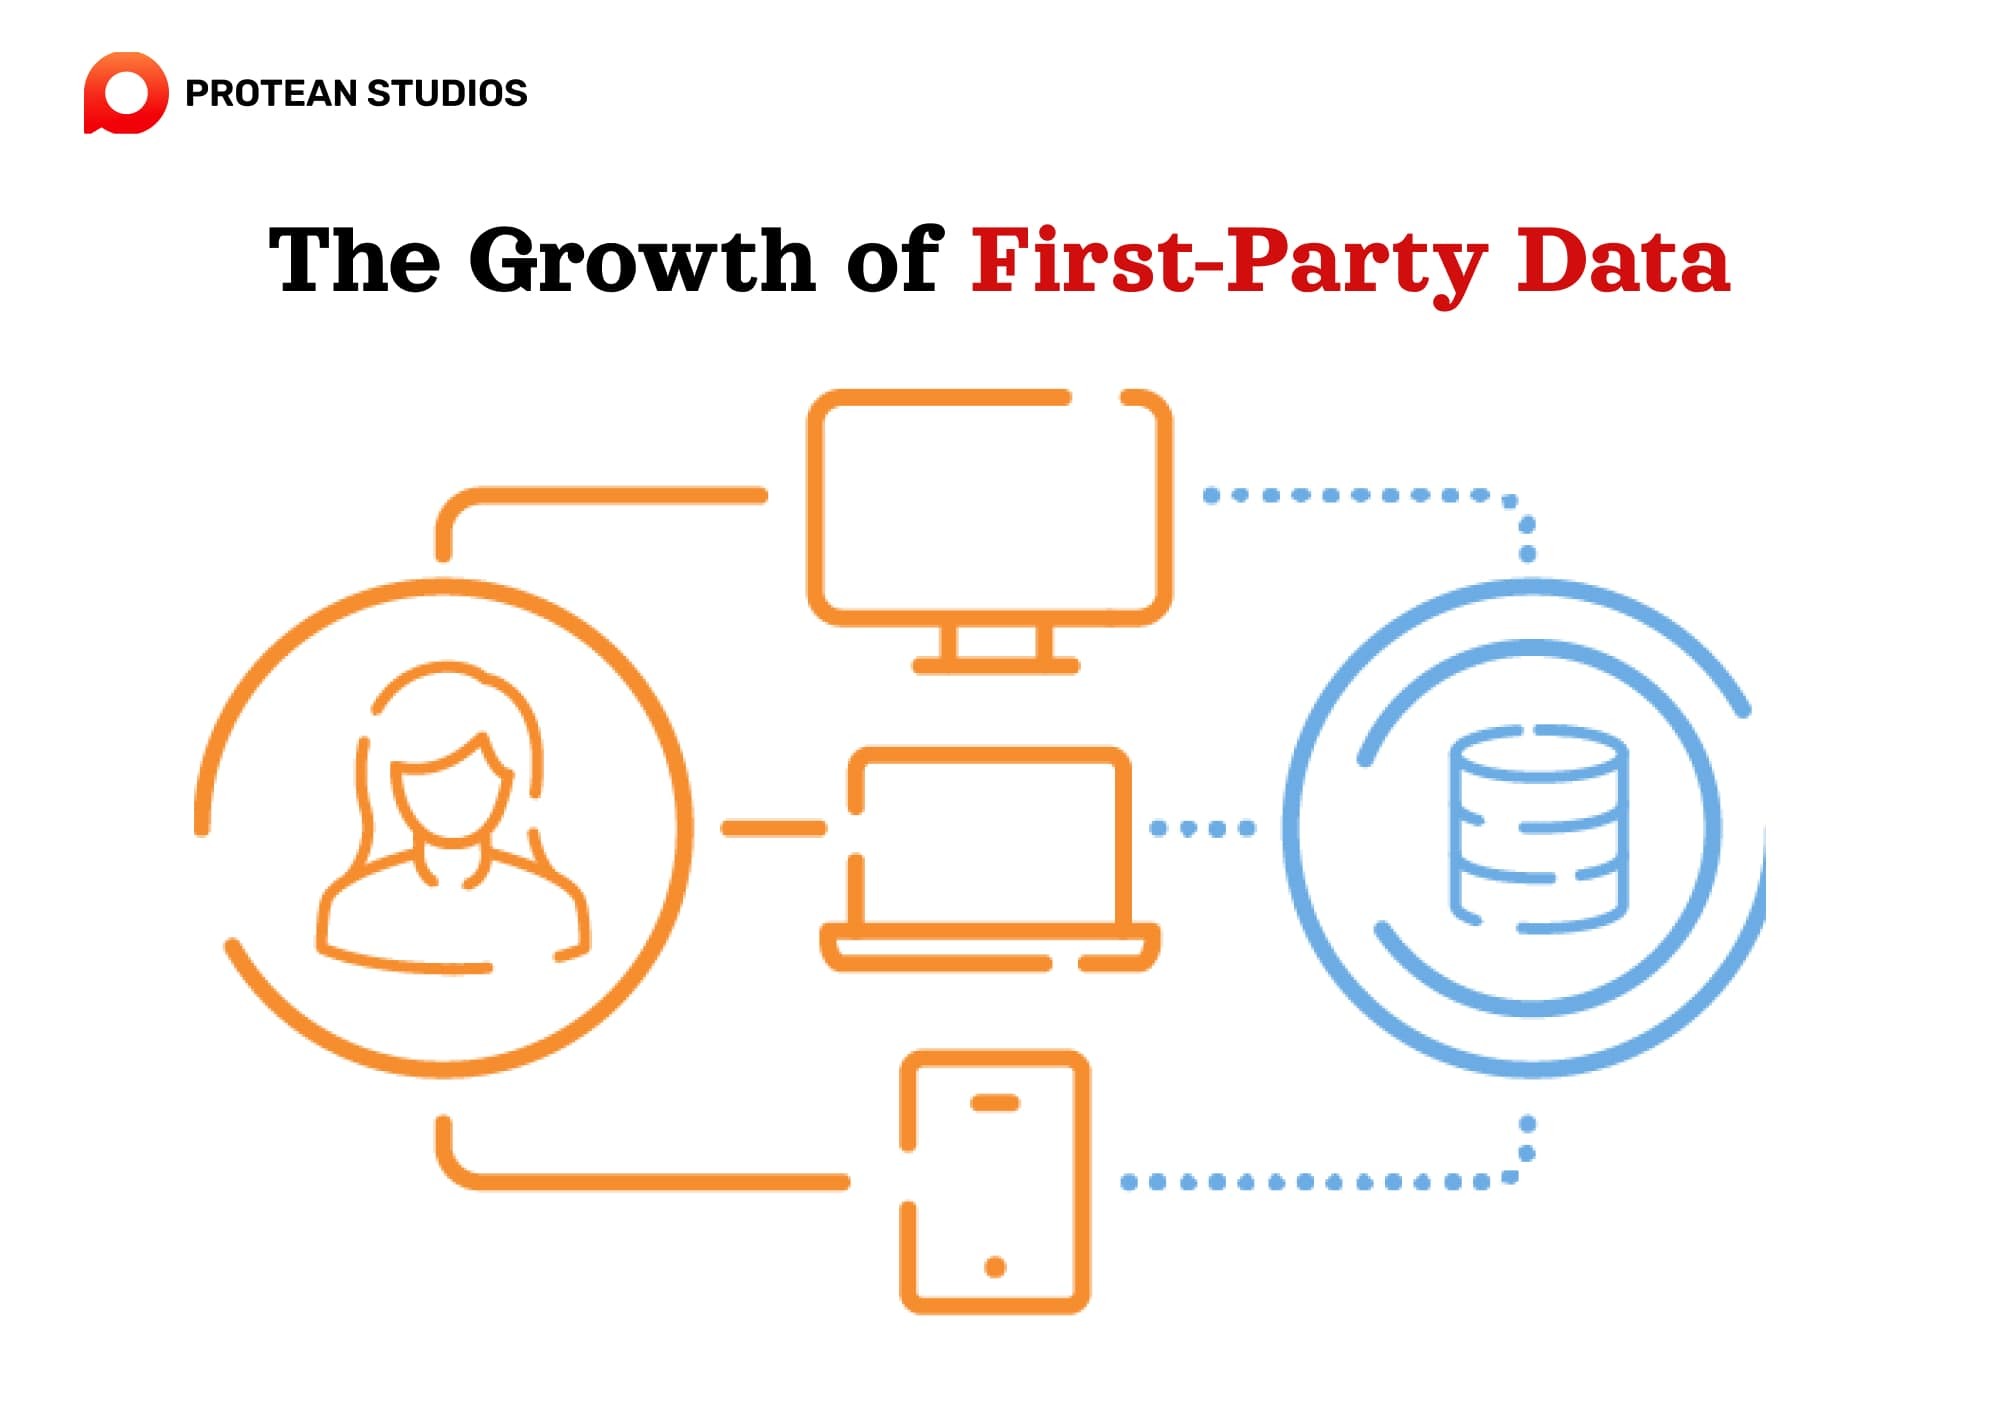 First-party data is dominant for marketing